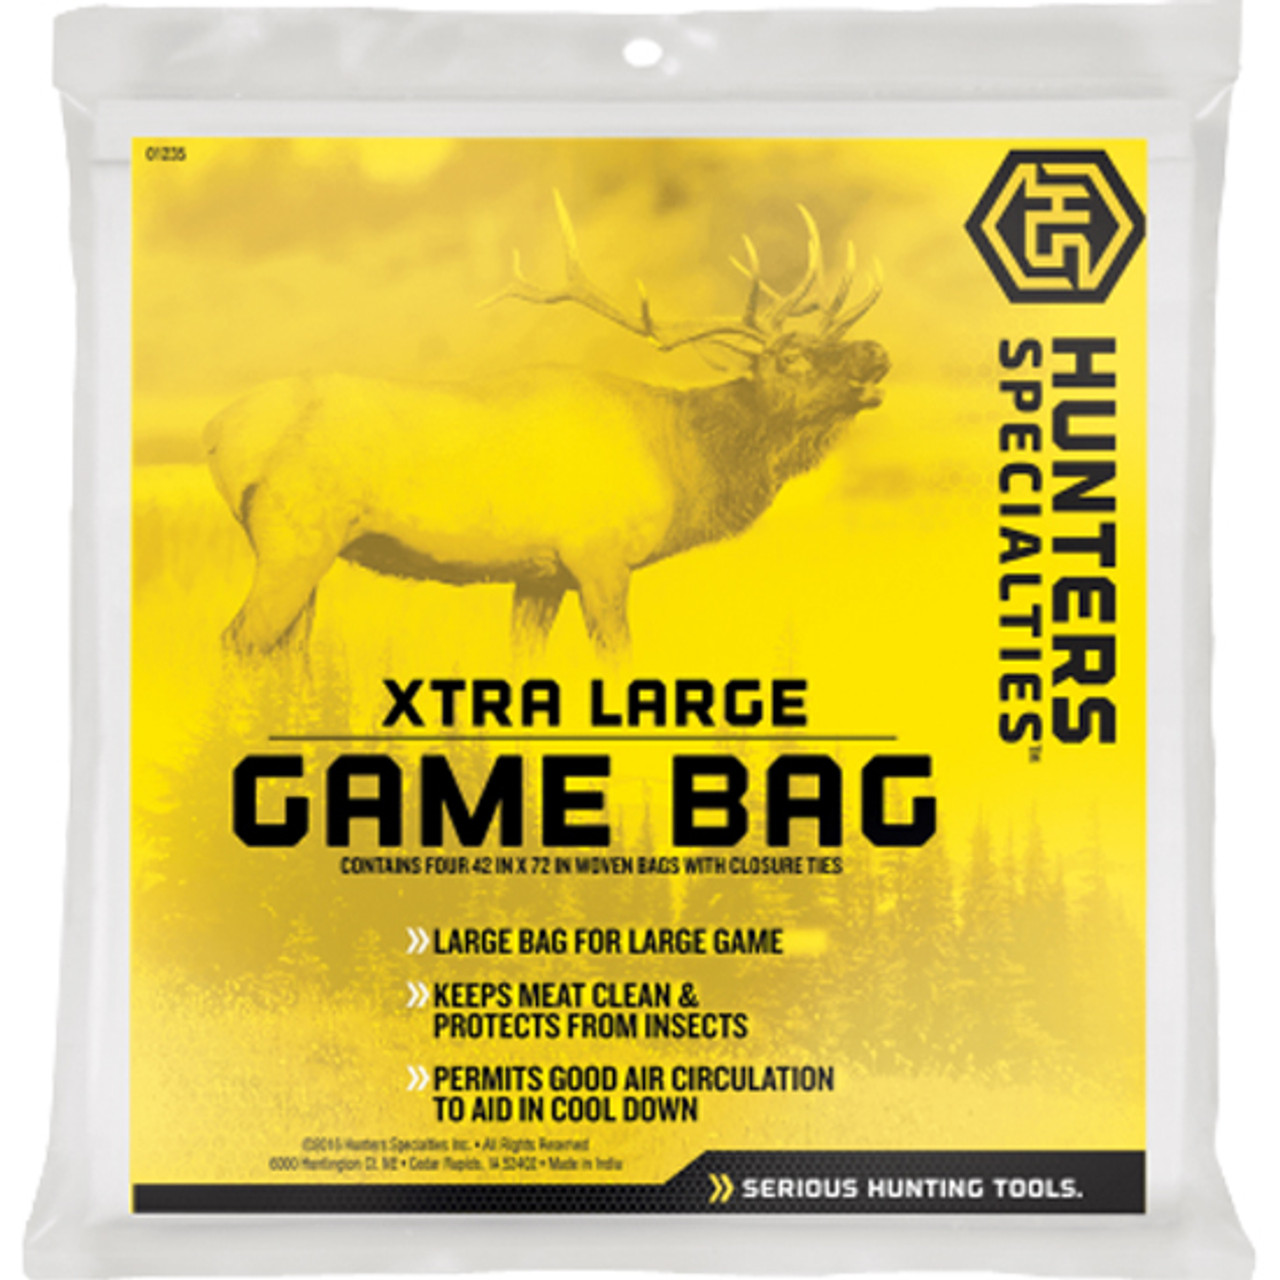 Game Birds Meat Bags - Bunzl Processor Division